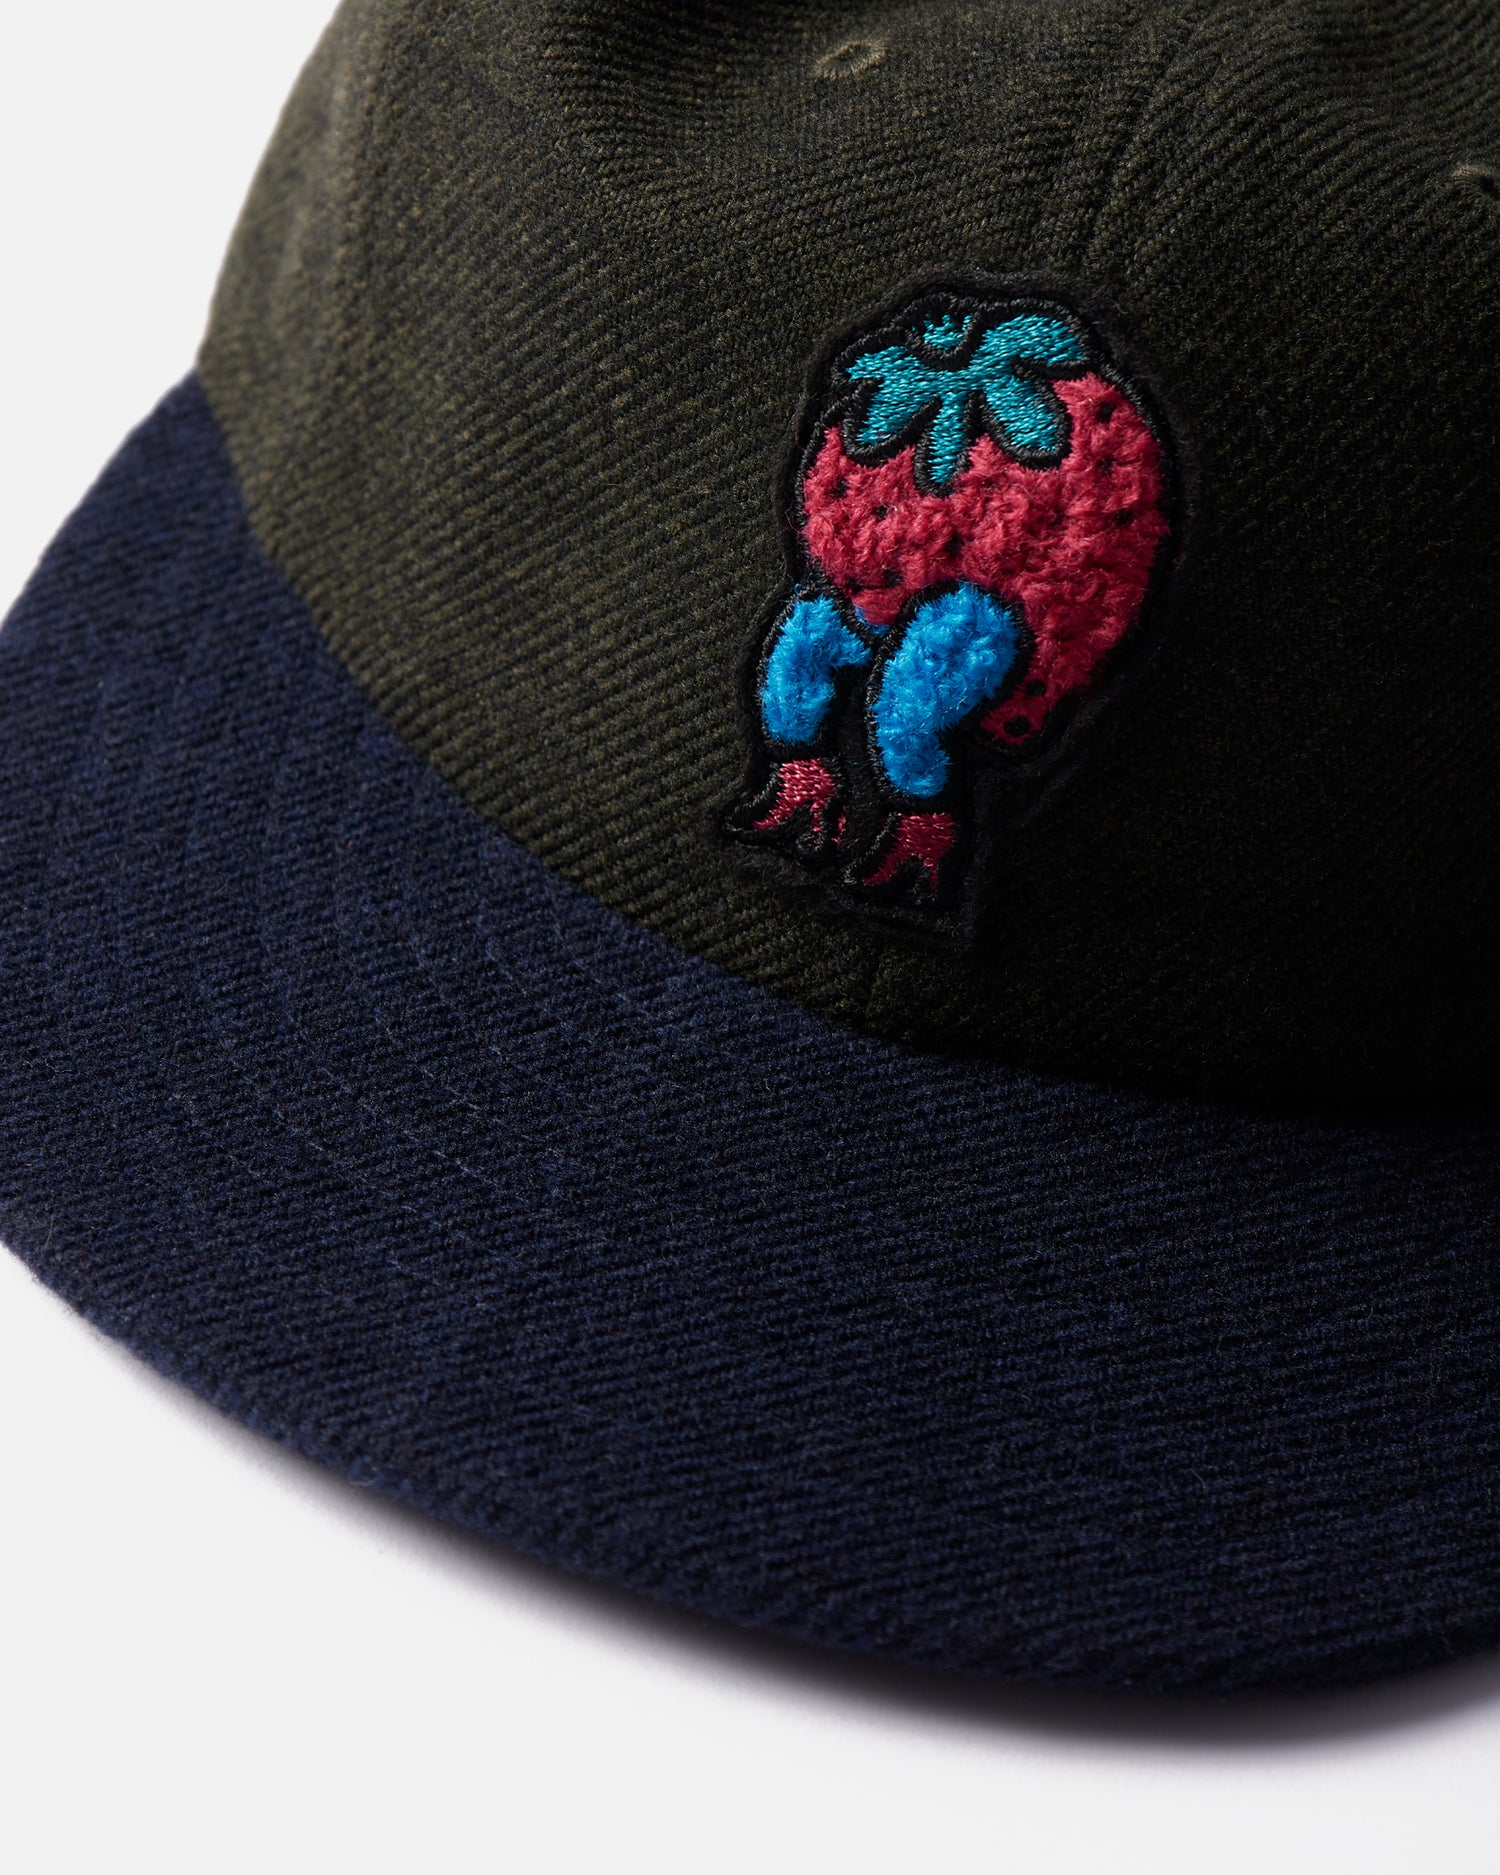 byParra Stupid Strawberry 6 Panel Hat (Hunter Green)